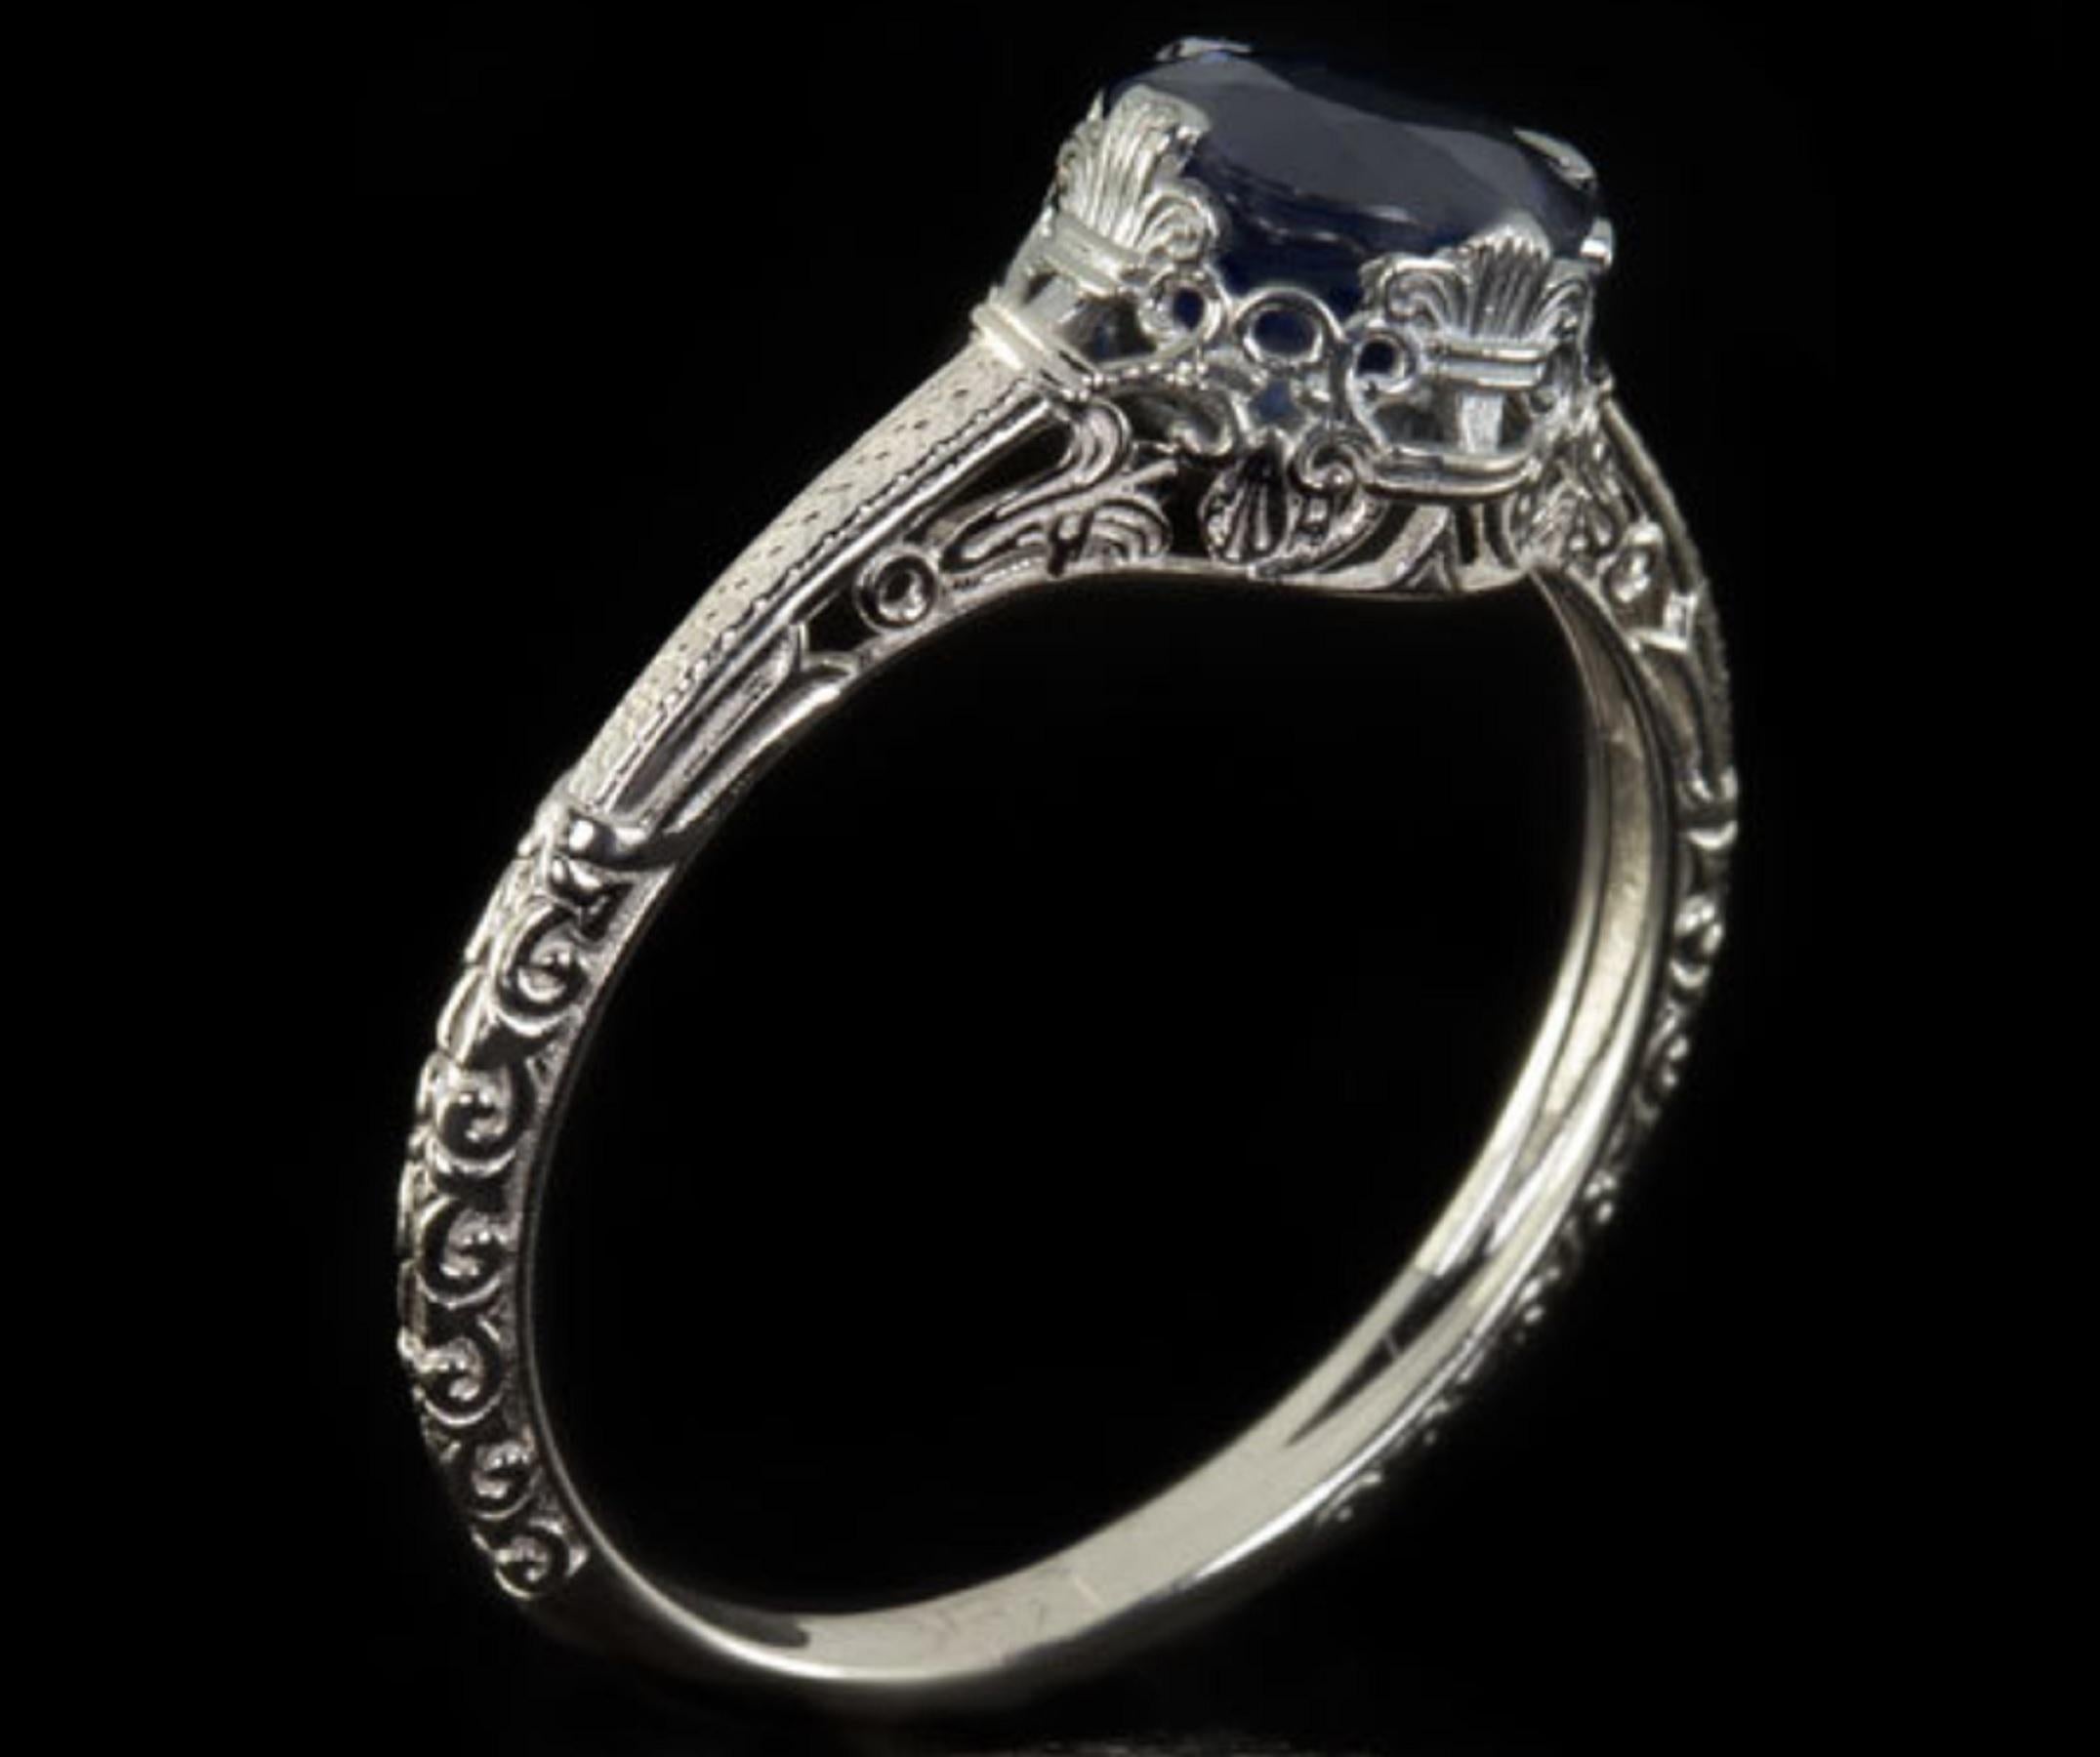 sapphire ring reminiscent of the 1920s Art Nouveau era. 

This beautiful ring features a single round cut natural sapphire (approximately 1ct) firmly prong set in the solid 14K White Gold band. This lovely sapphire measures 6mm wide and the ring is